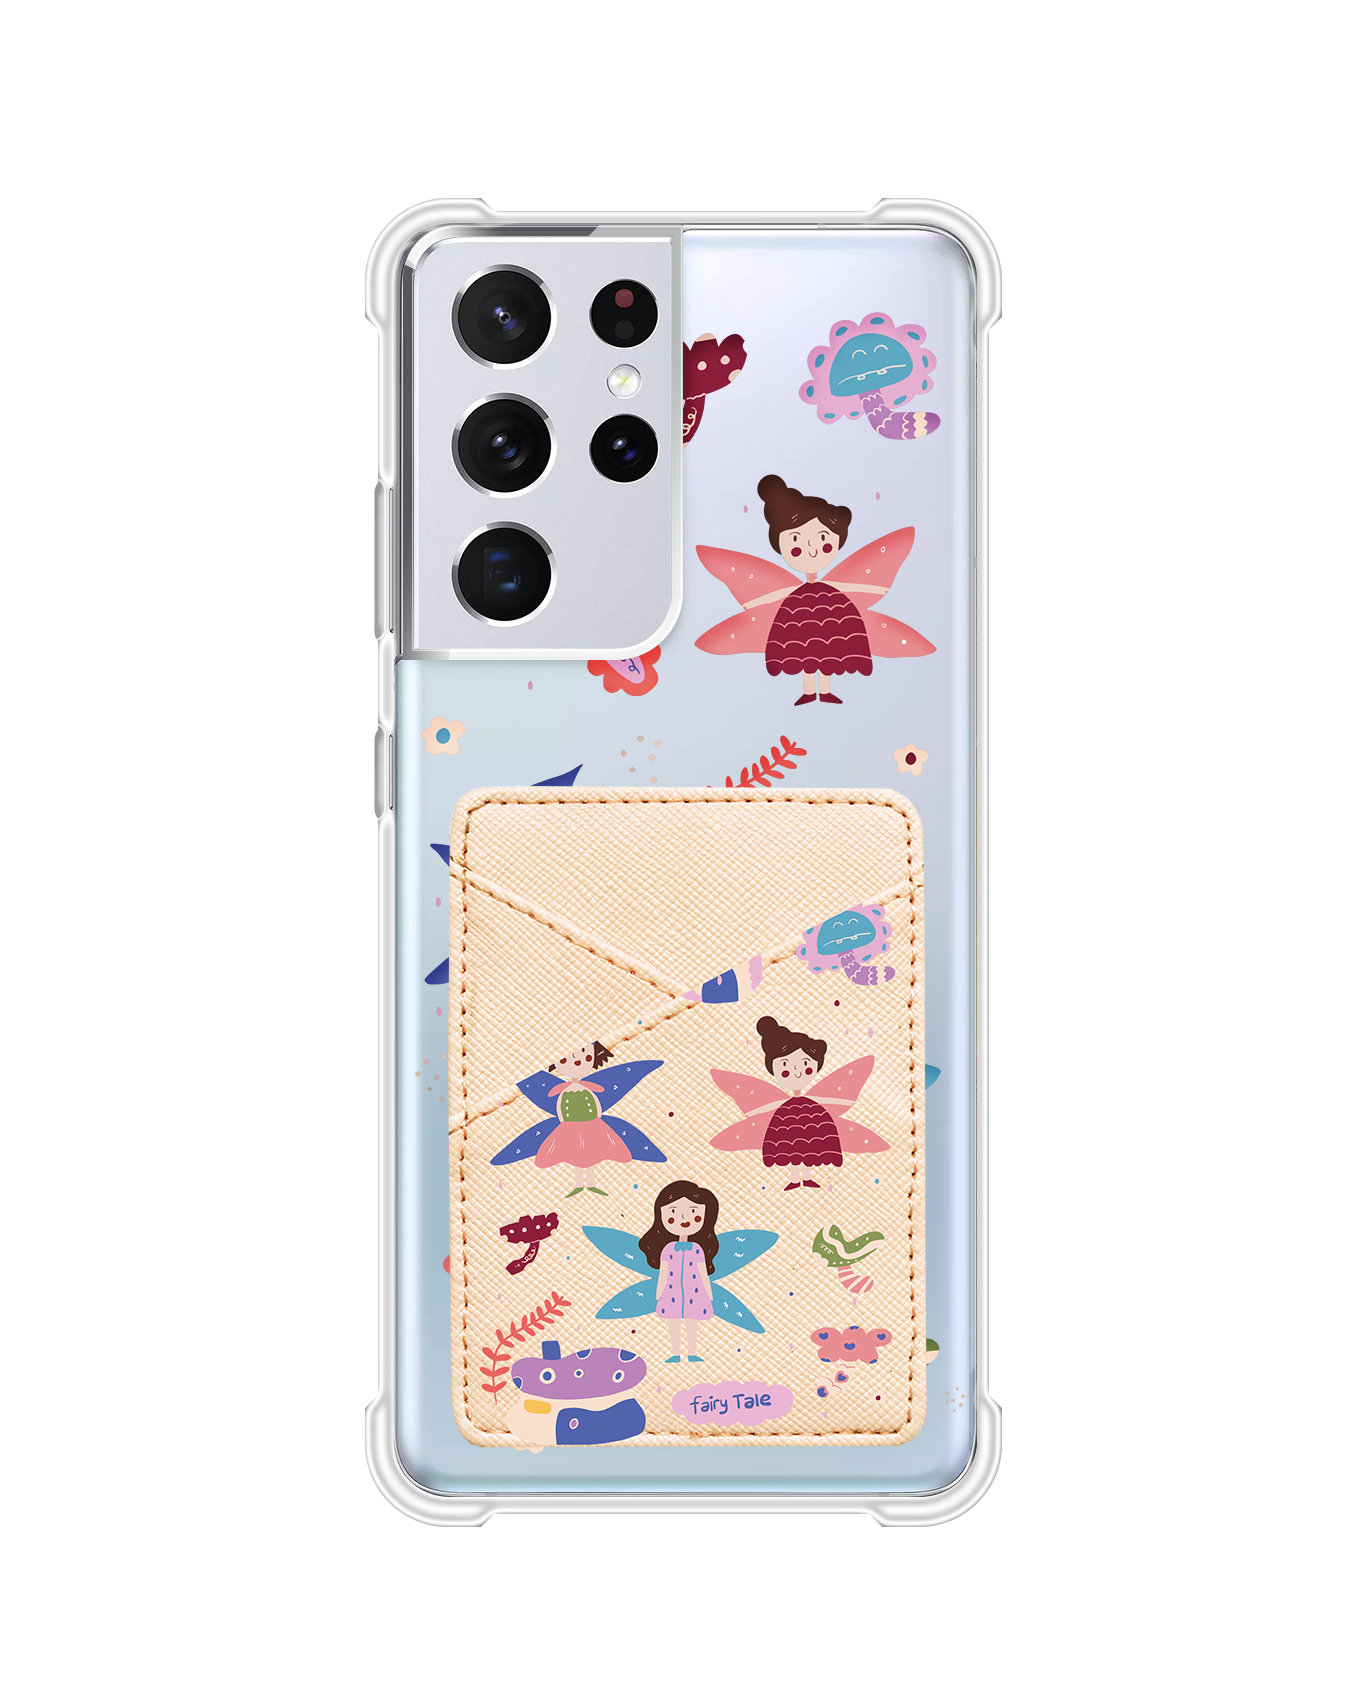 Android Phone Wallet Case - Fairytale